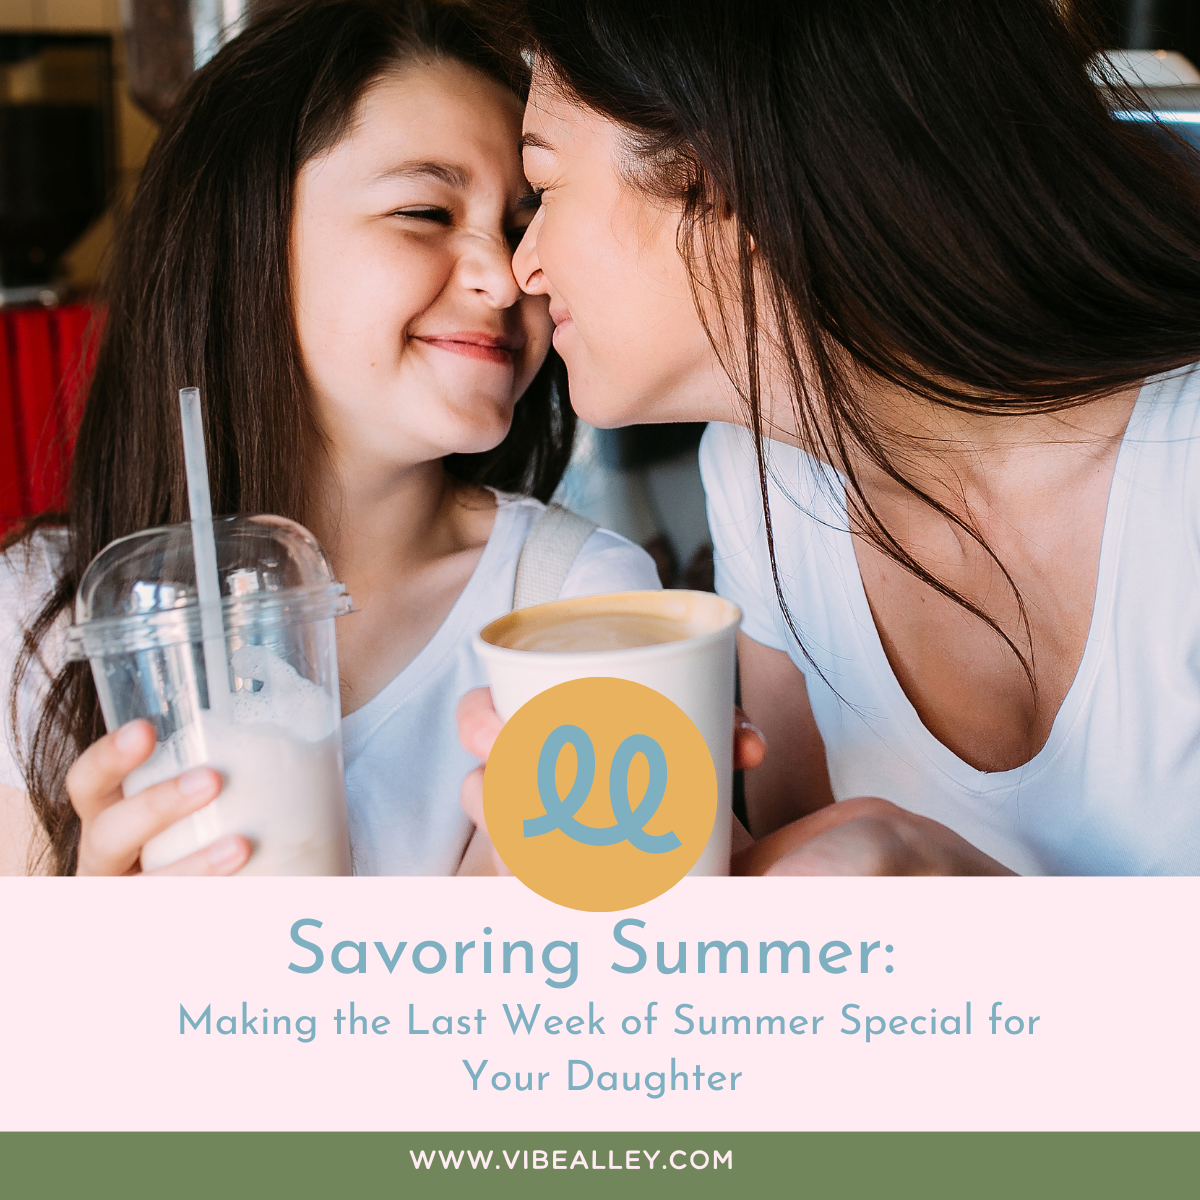 Savoring Summer:  Making the Last Week of Summer Special for Your Daughter